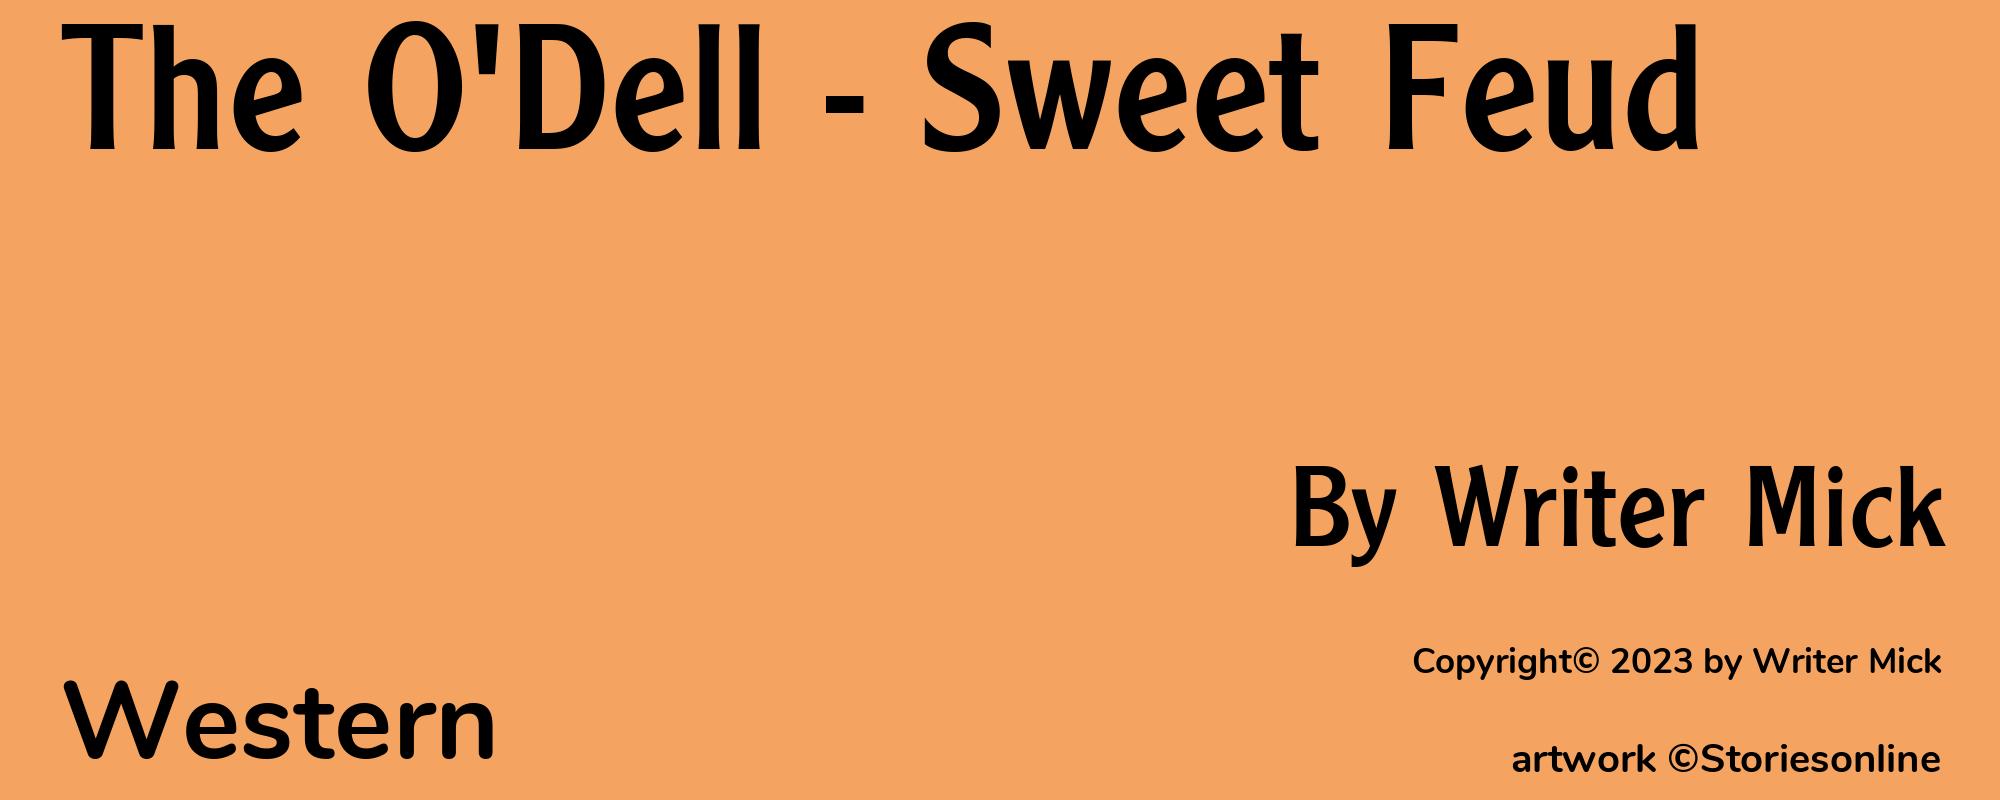 The O'Dell - Sweet Feud - Cover